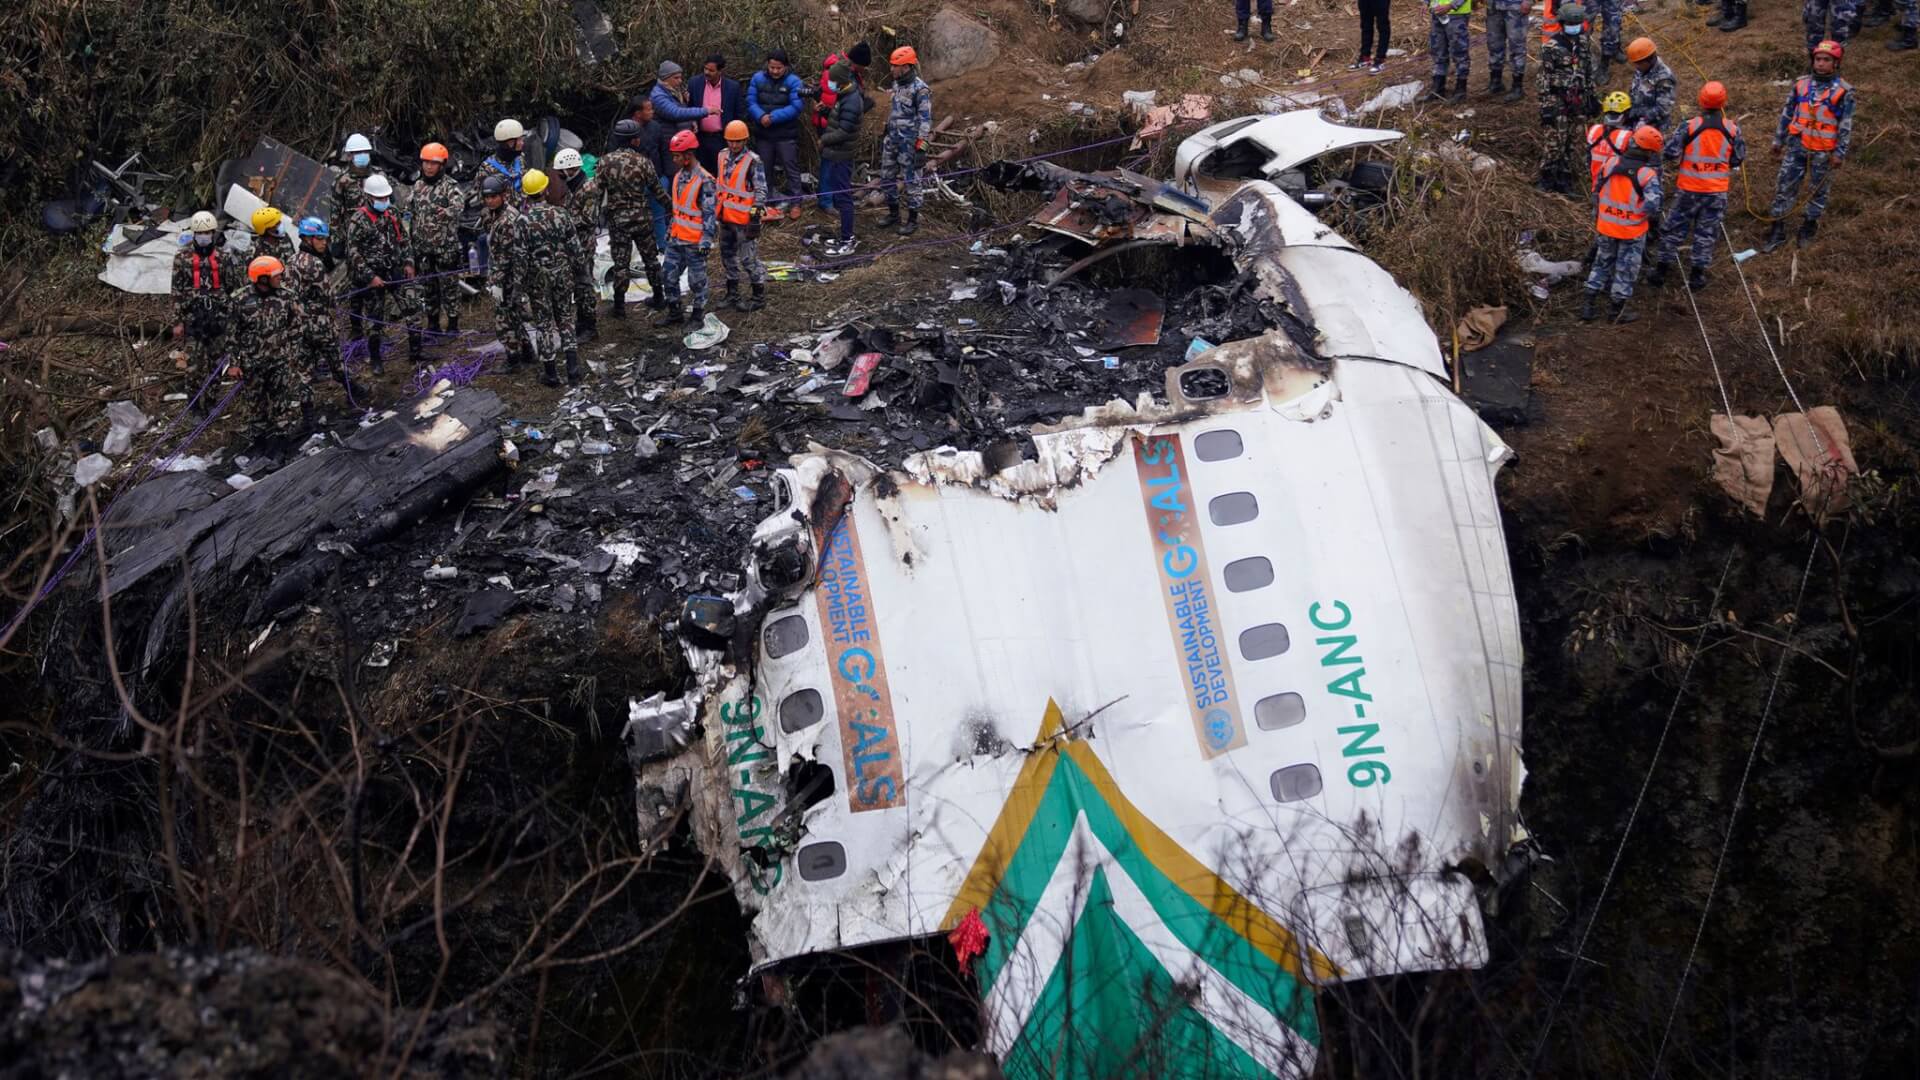 The Pokhara Plane Crash Highlights a Bigger Problem in Nepal’s Aviation Industry